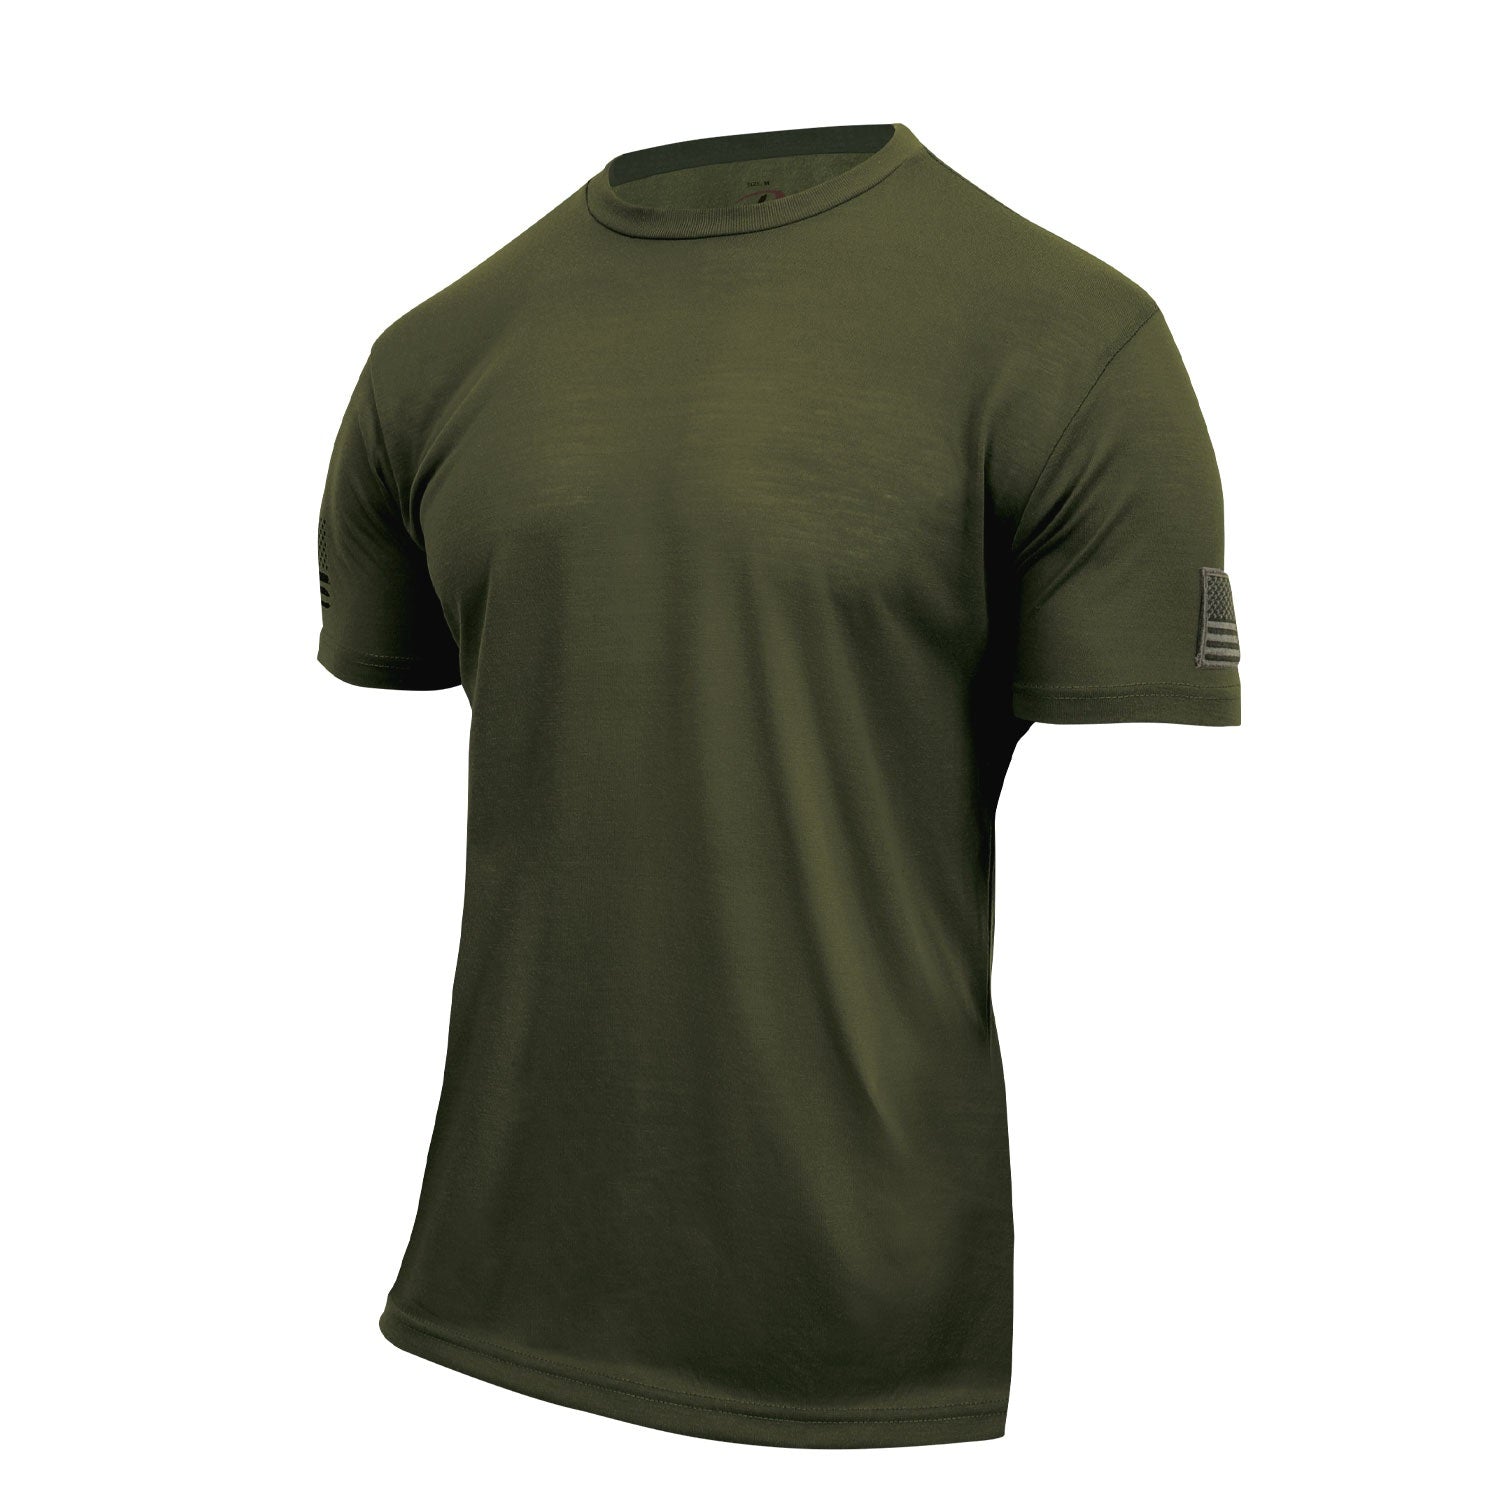 Rothco Tactical Athletic Fit T-Shirt Olive Drab